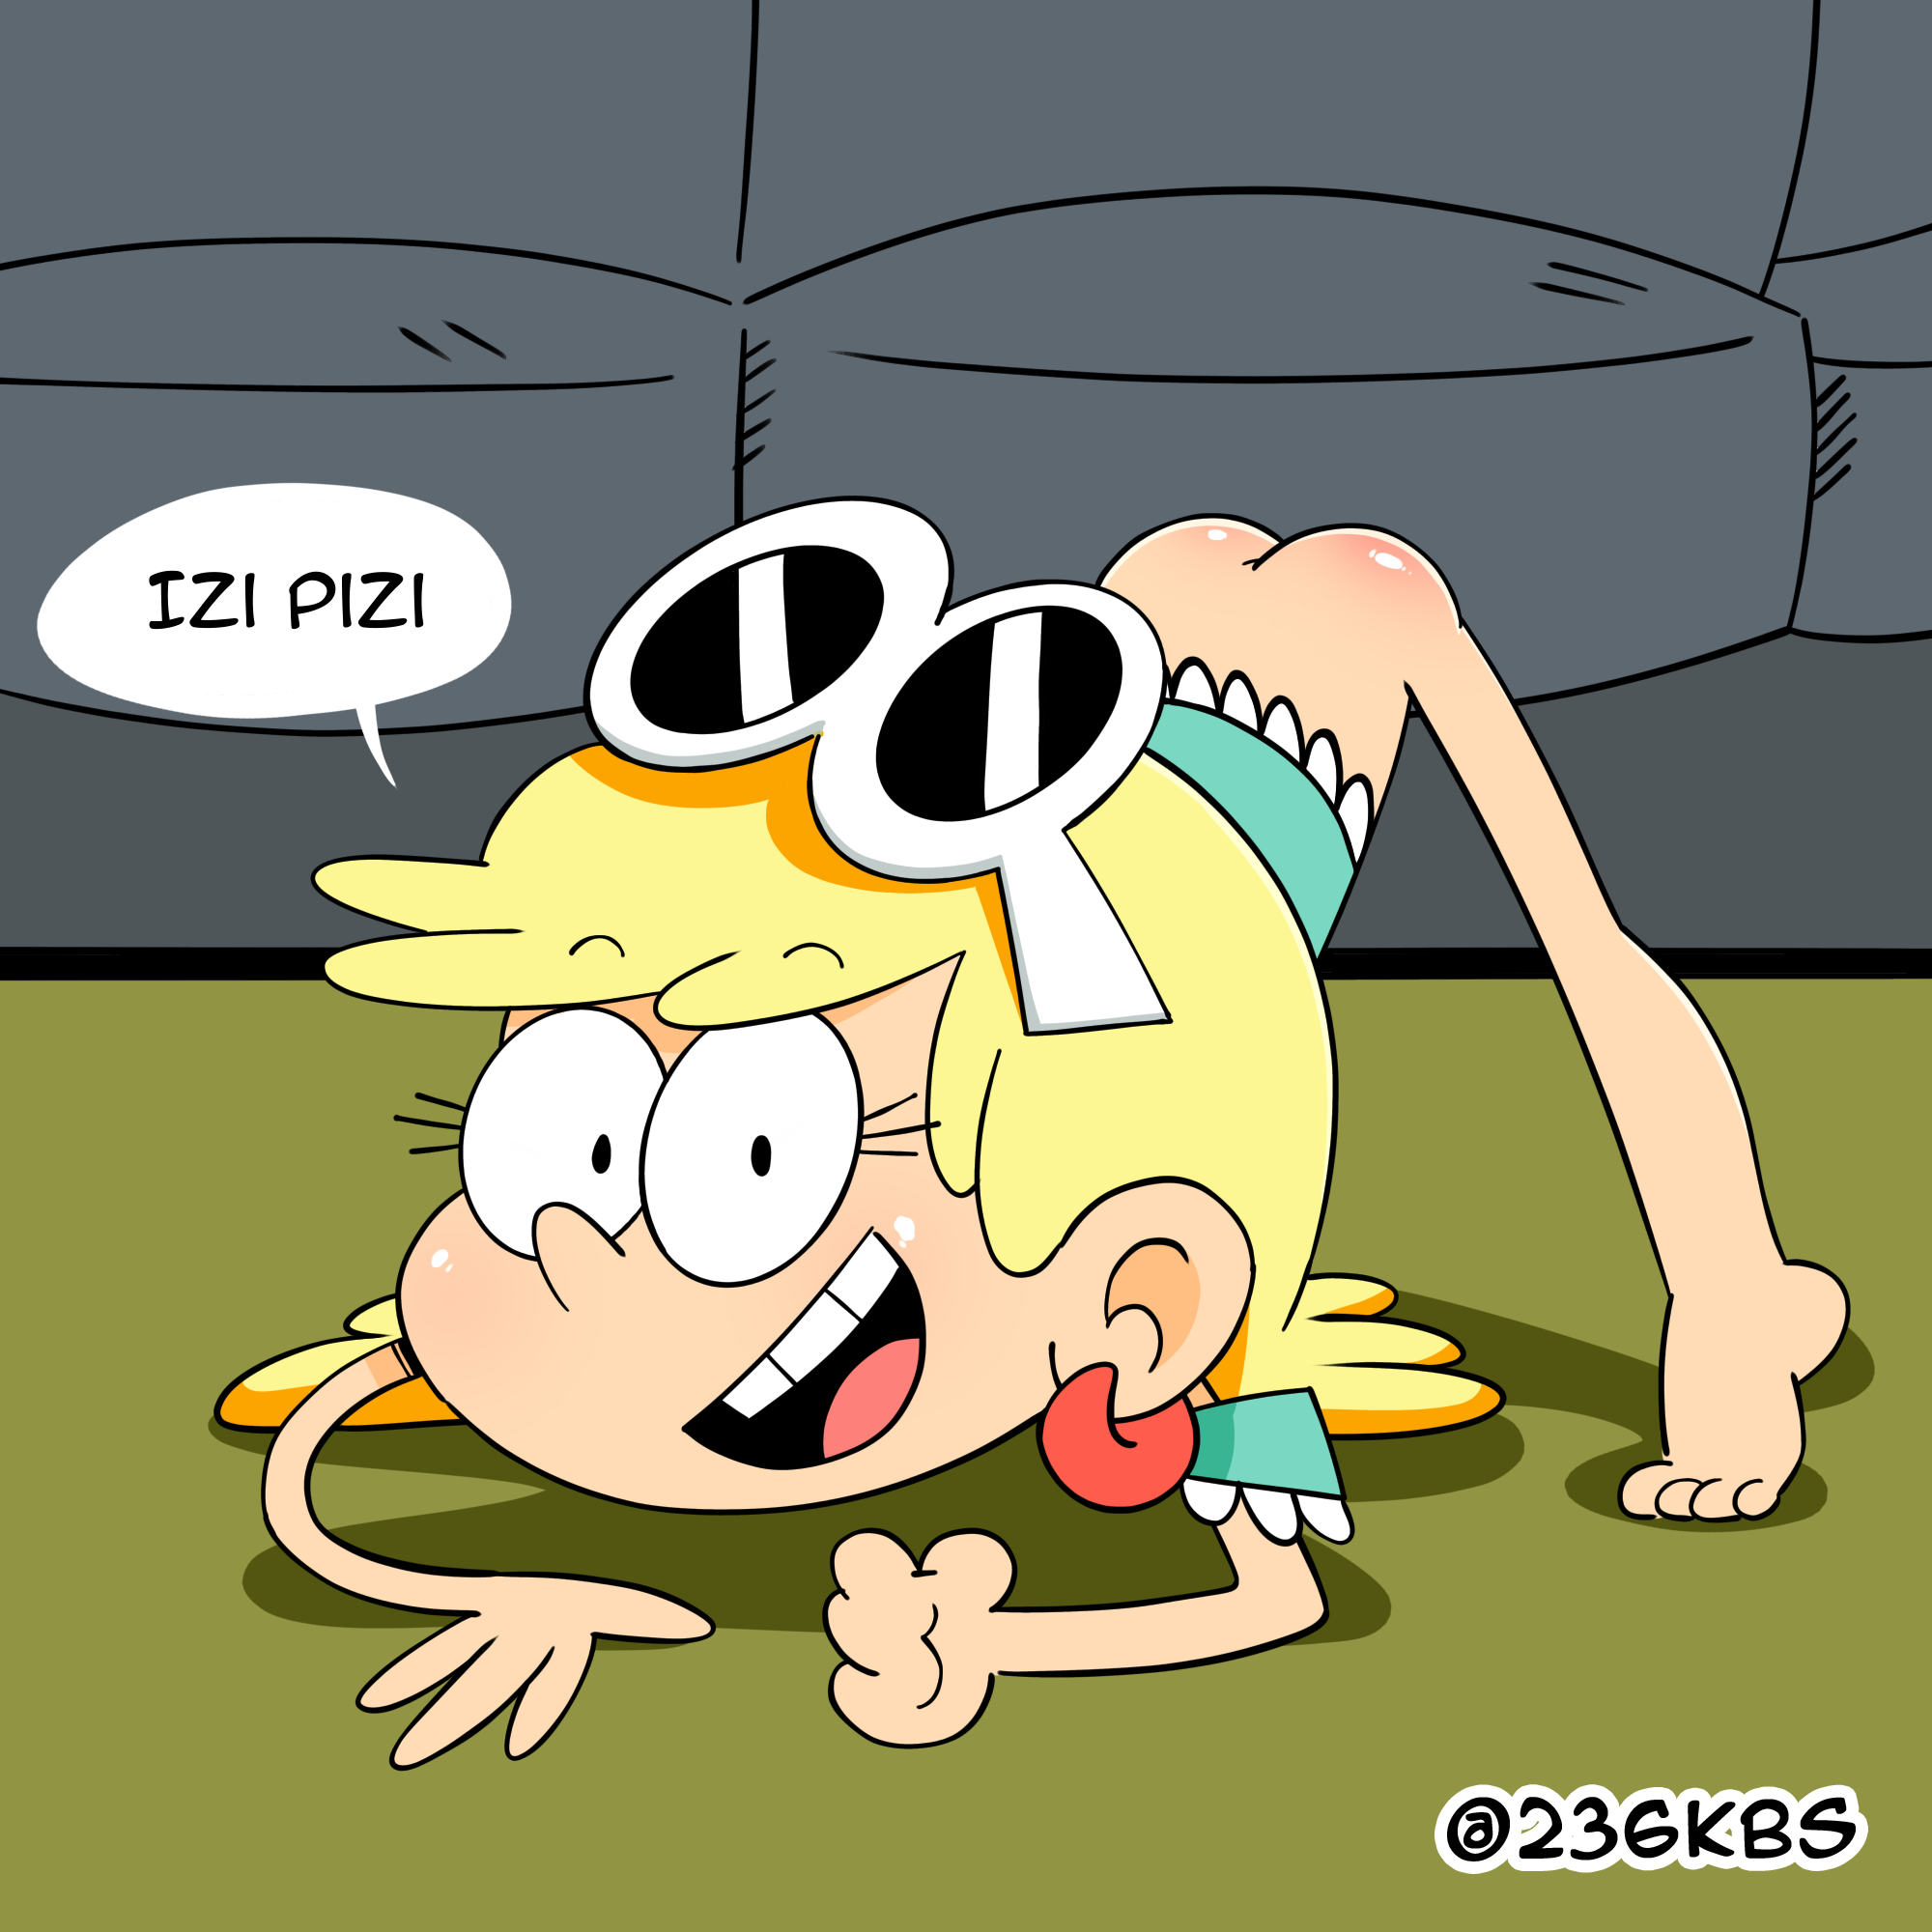 Post 4535143 236kbs Leniloud Theloudhouse 2169